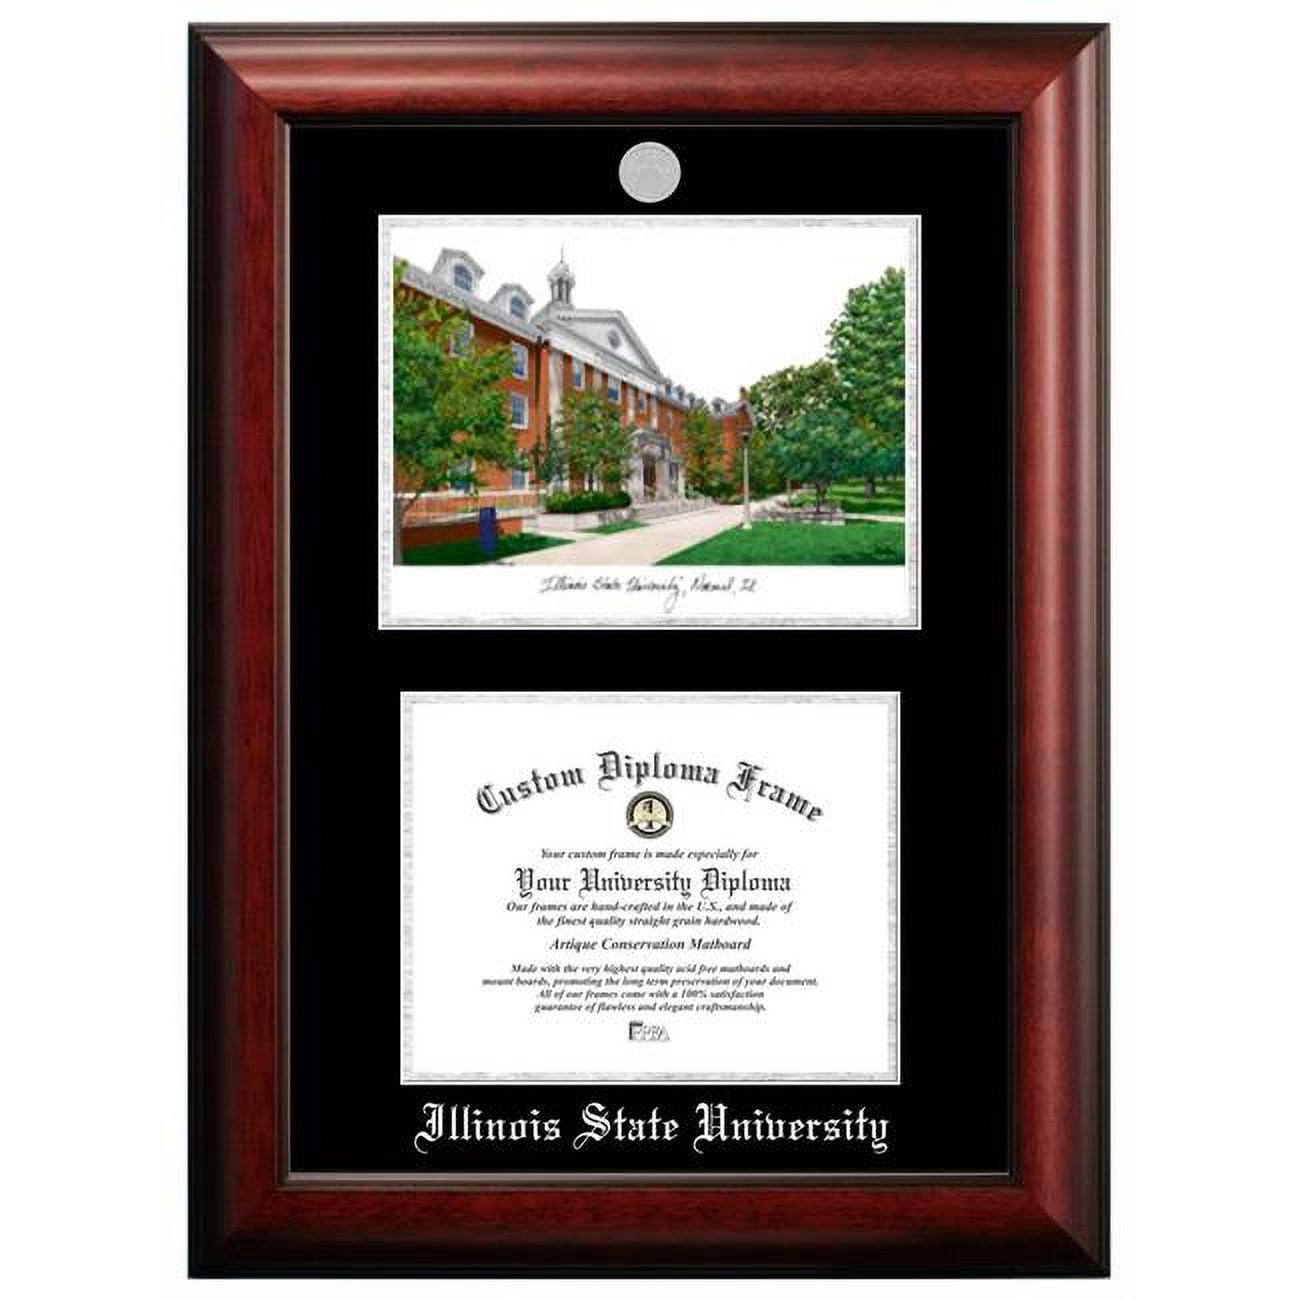 Campus Images IL966LSED-108 10 x 8 in. Illinois State University Silver Embossed Diploma Frame with Lithograph